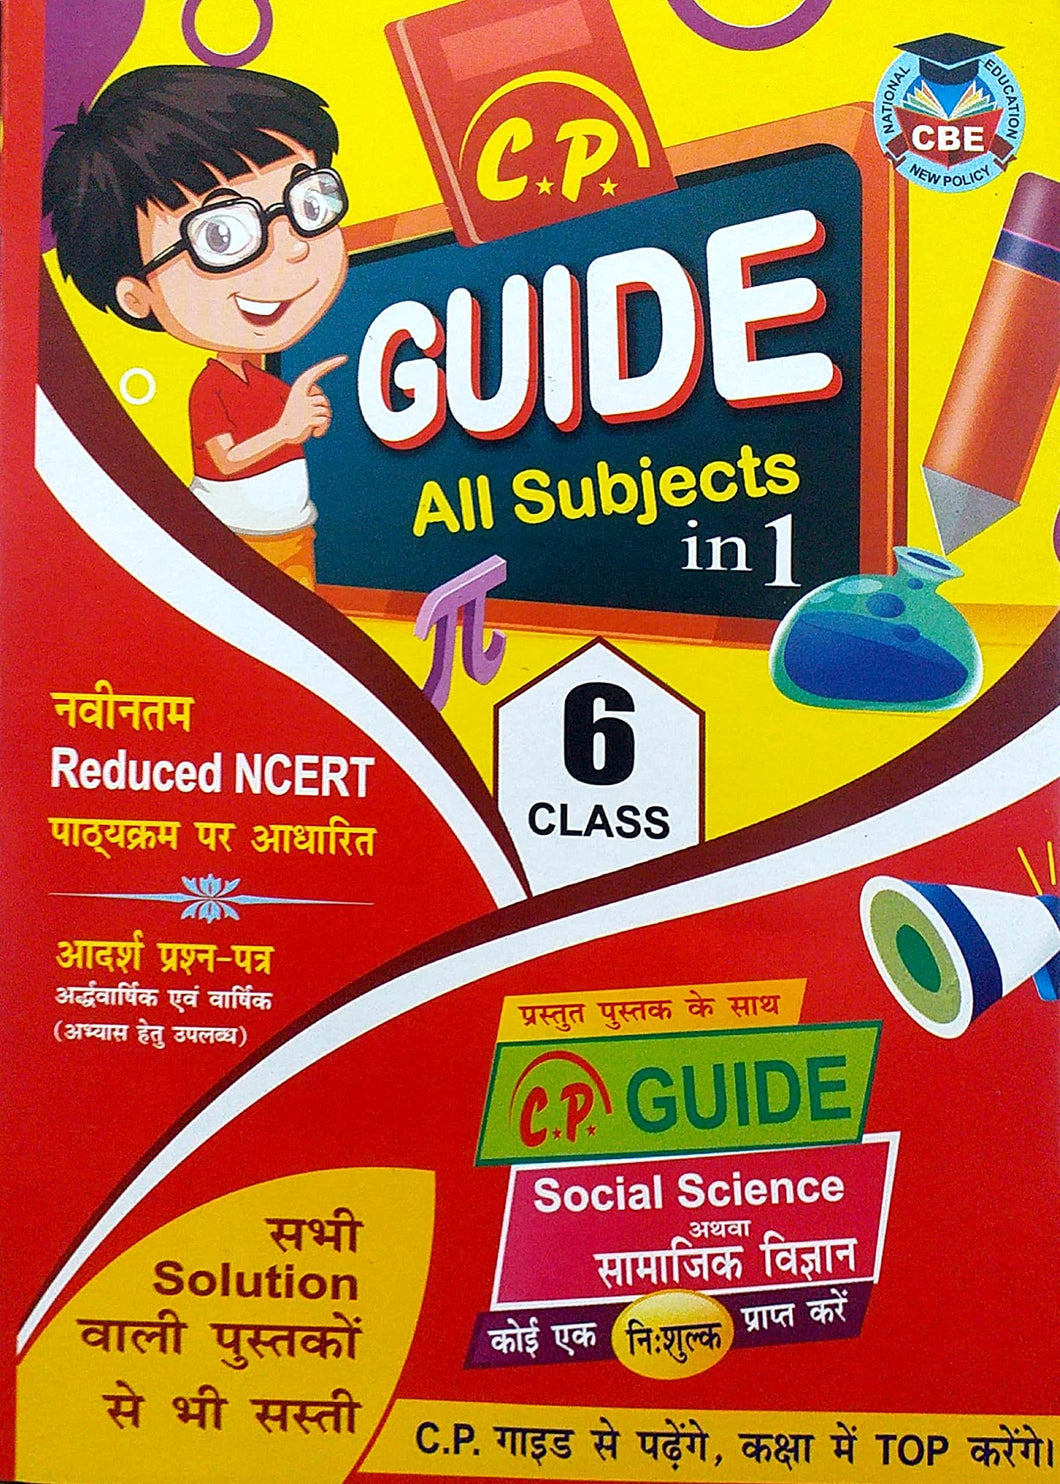 Class 6 Digest/Solution/Guide for all subjects Based On Latest NCERT/CBSE Curriculum